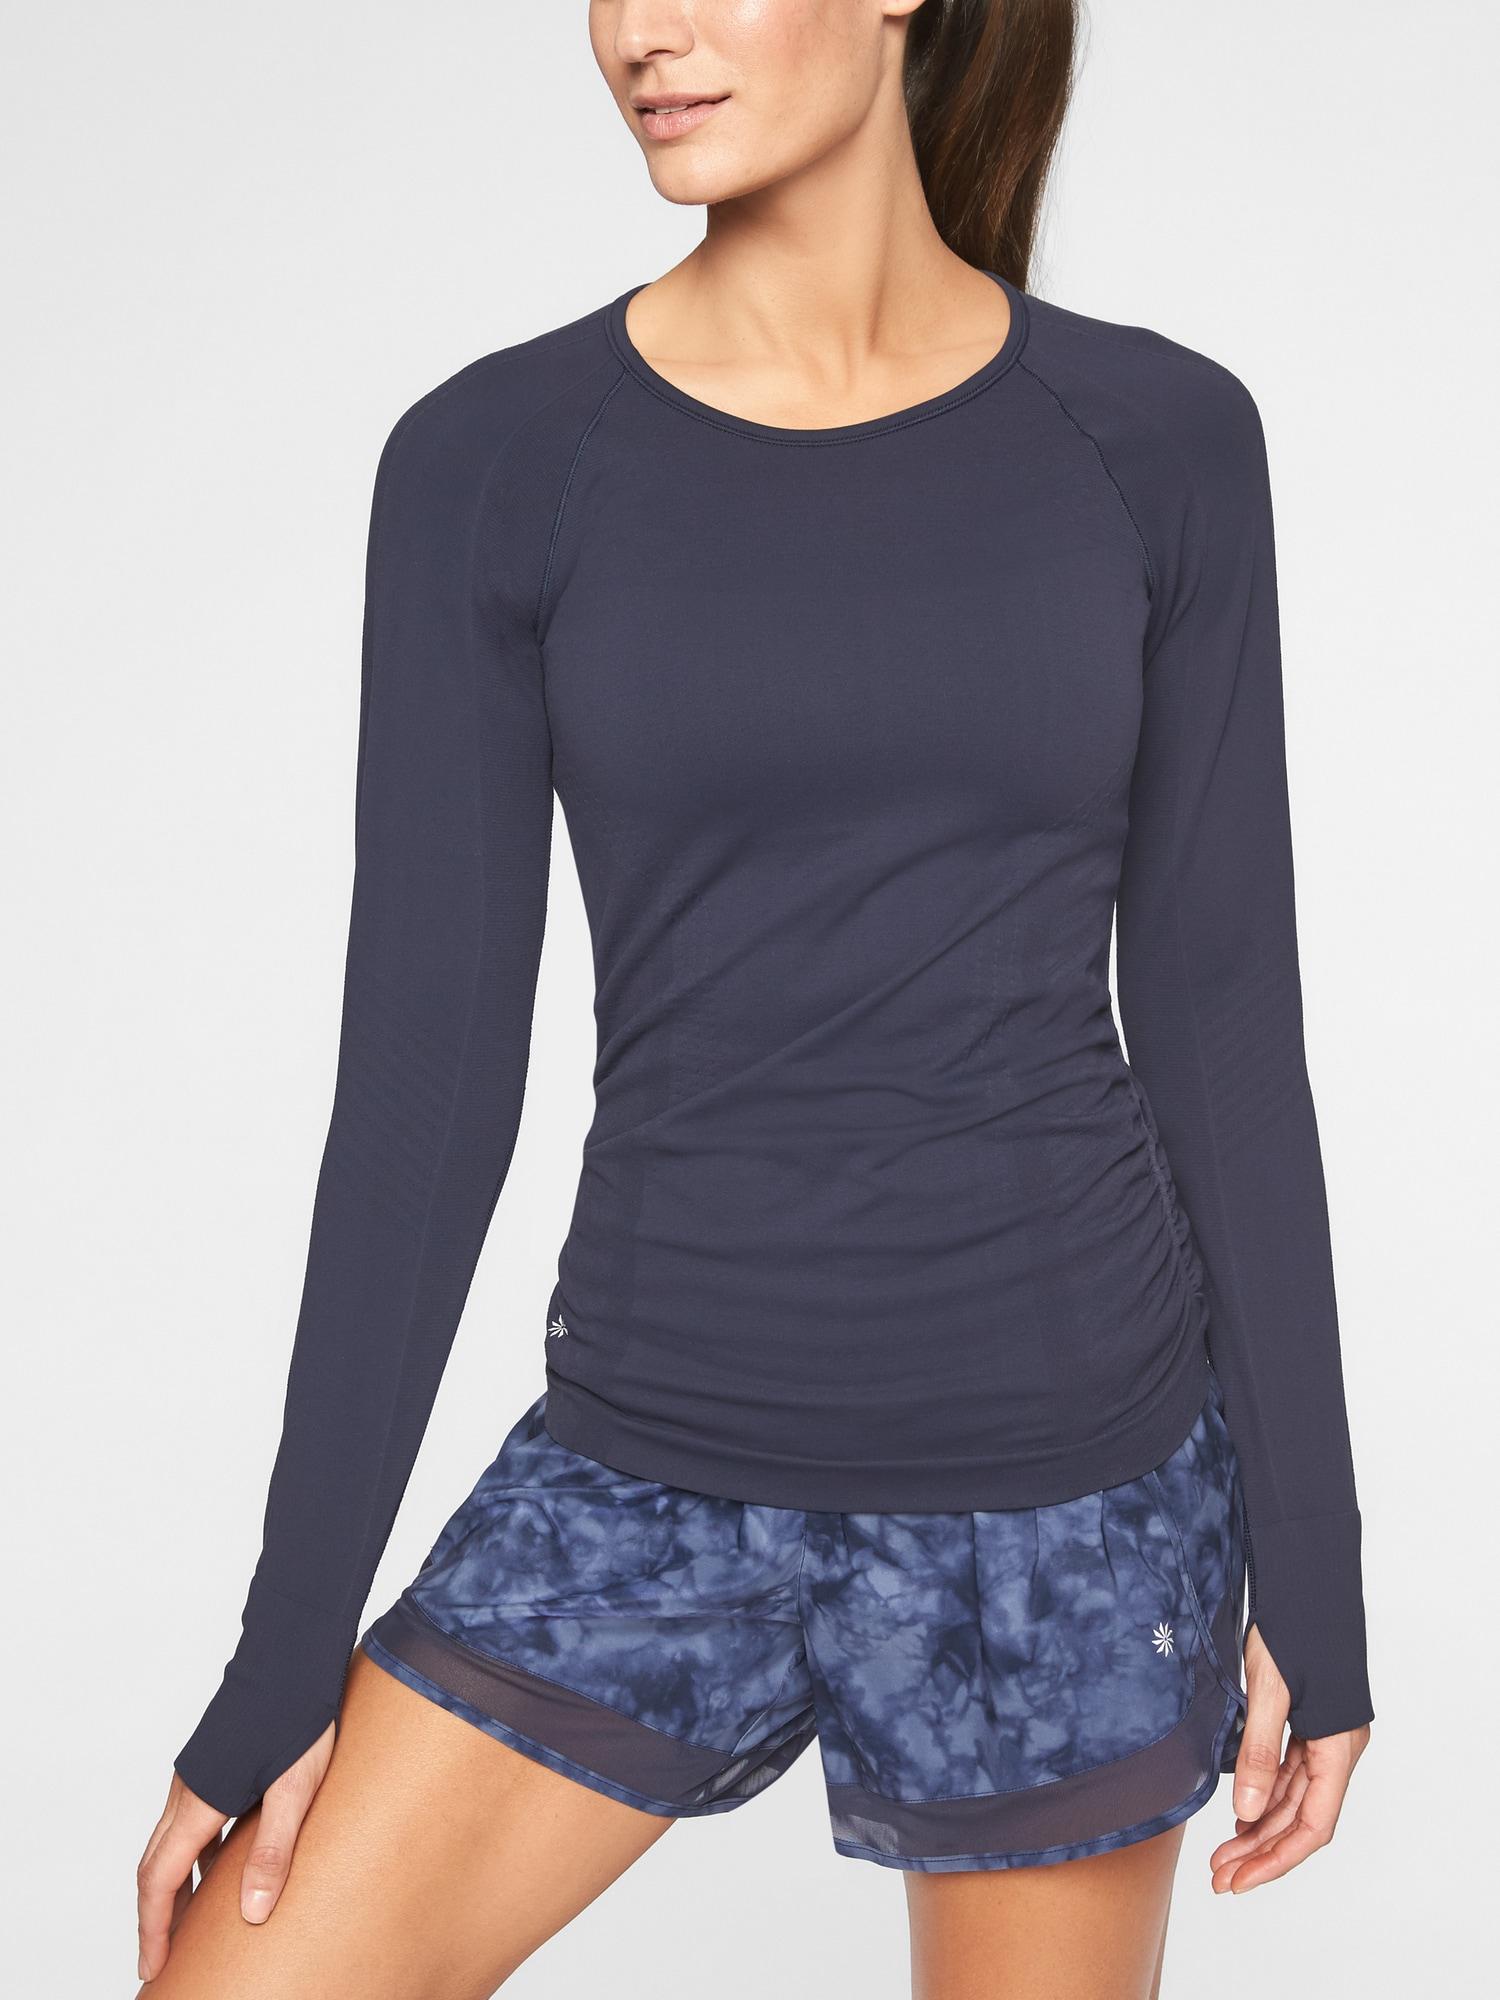 Speedlight Seamless Top Athleta Tops, Workout Tops For, 45% OFF